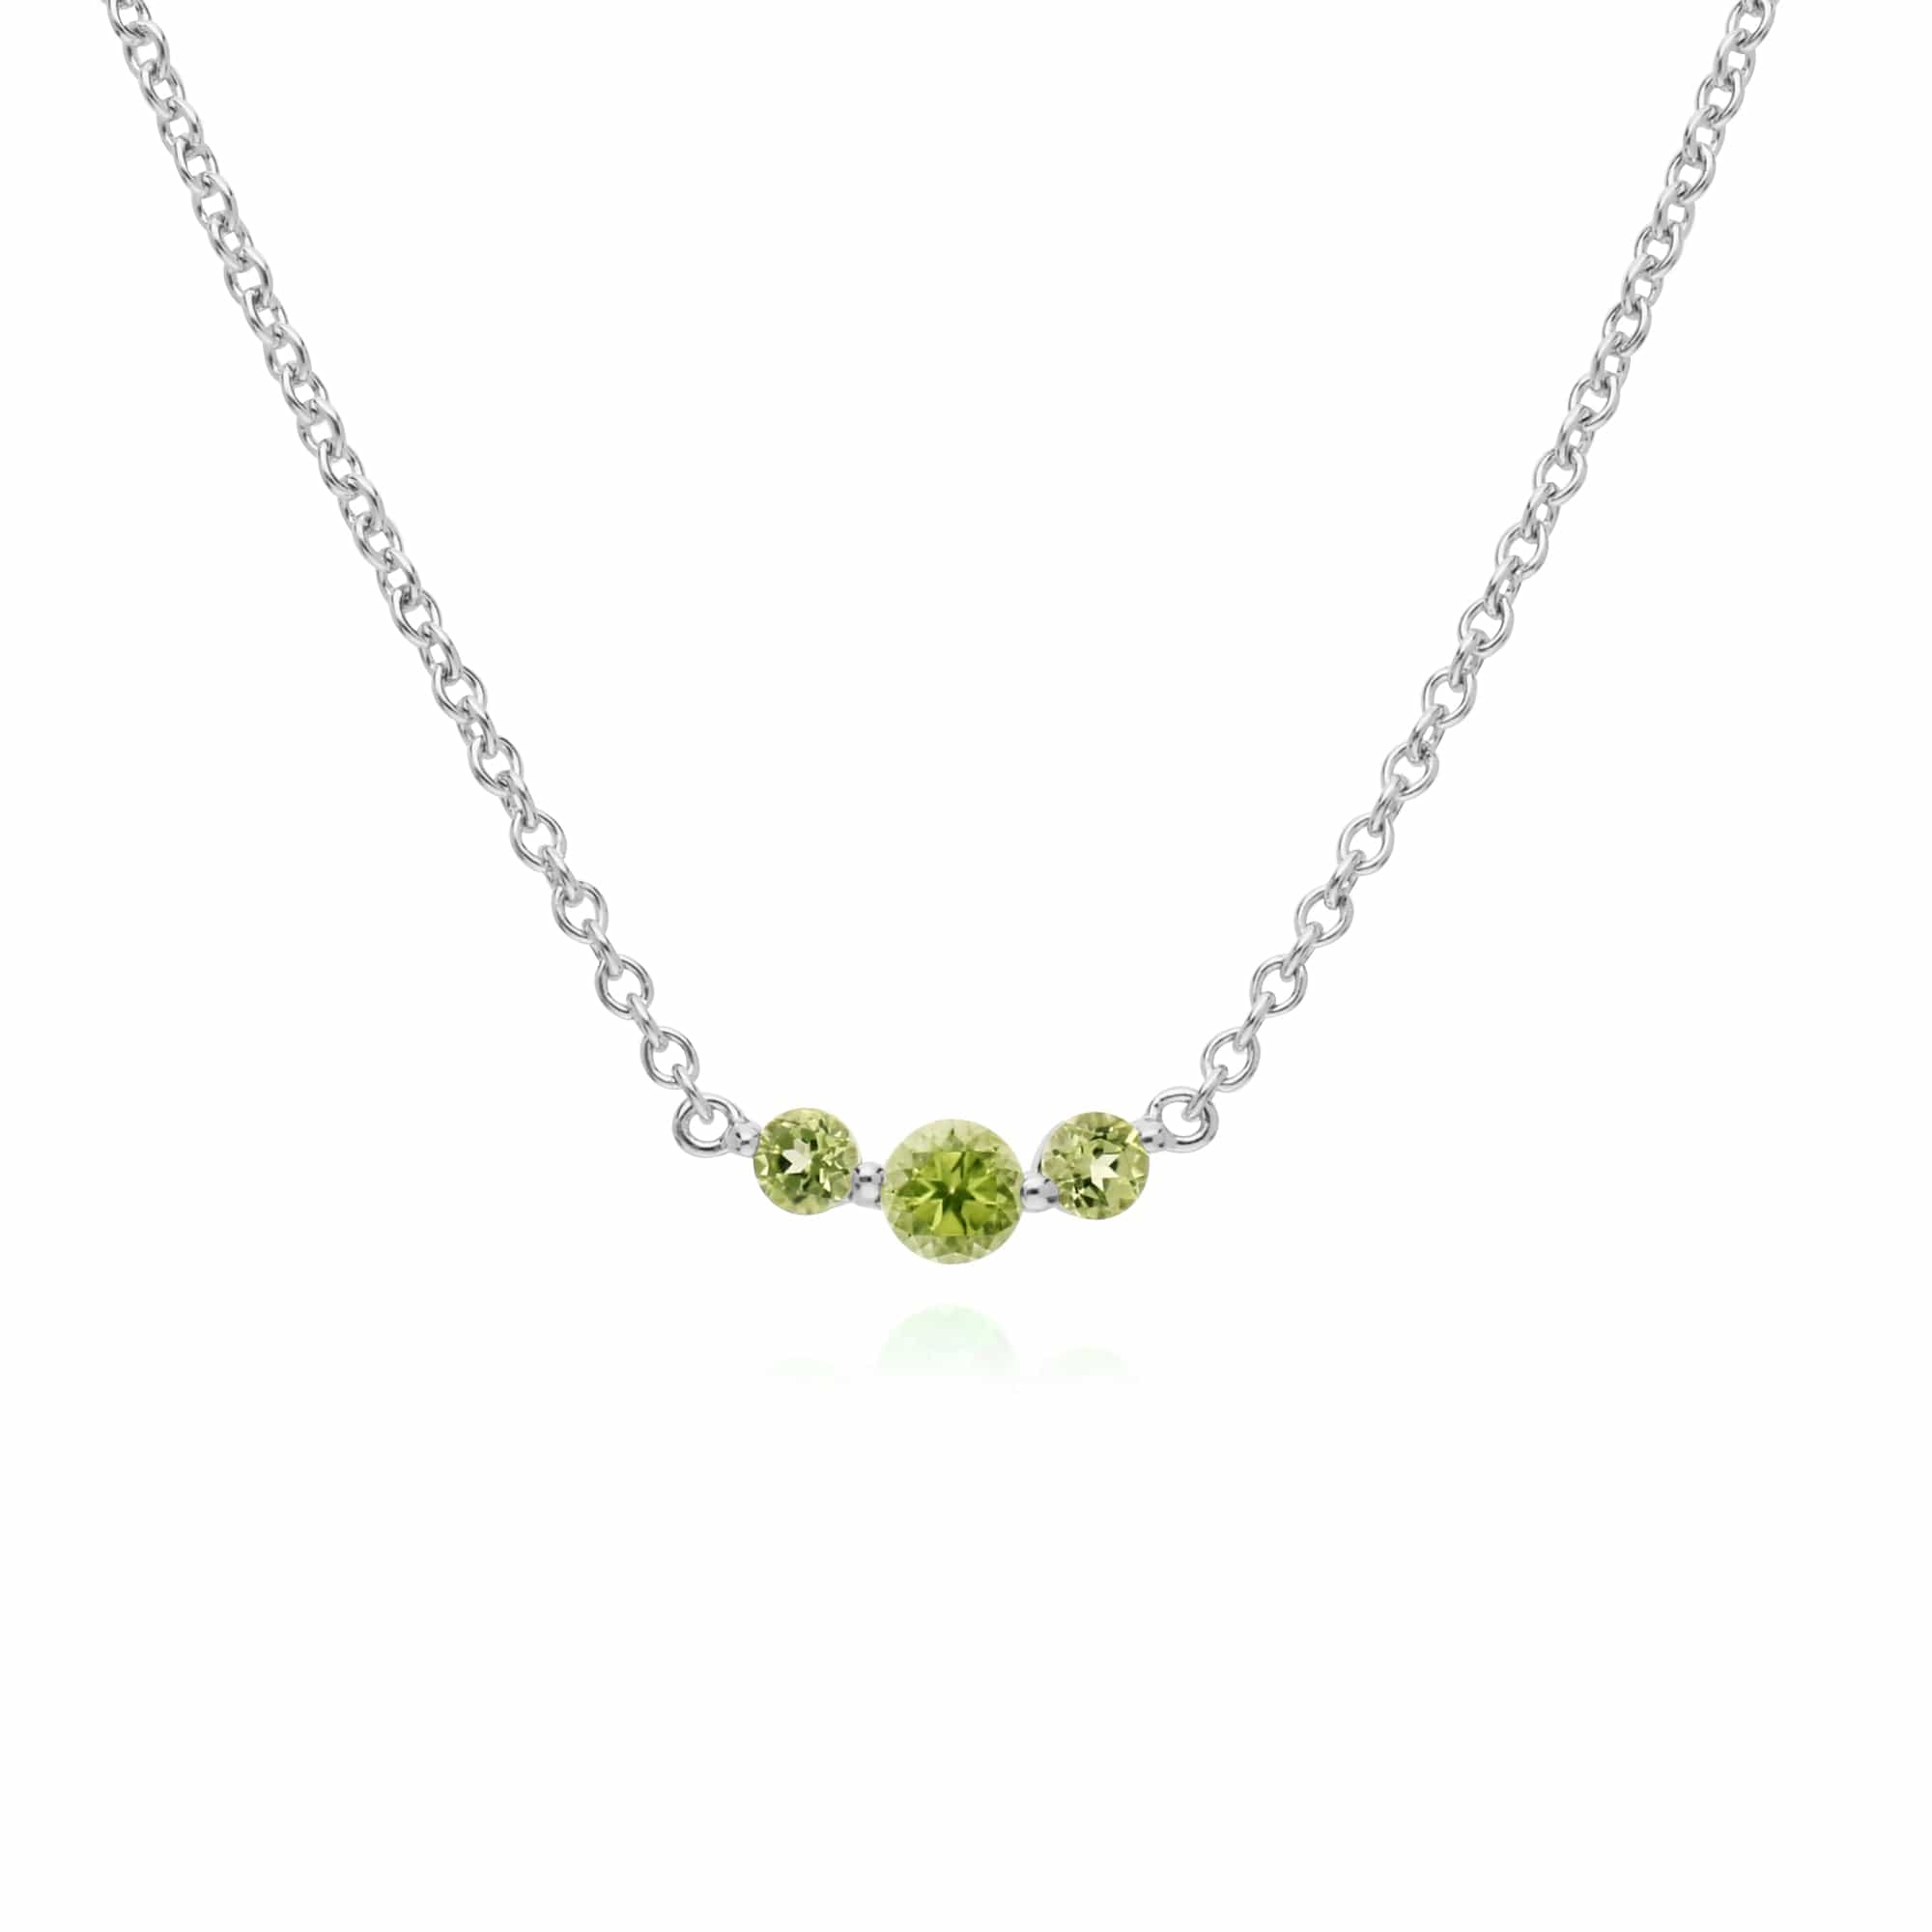 270E025504925-270N034204925 Classic Round Peridot Three Stone Gradient Earrings & Necklace Set in 925 Sterling Silver 3